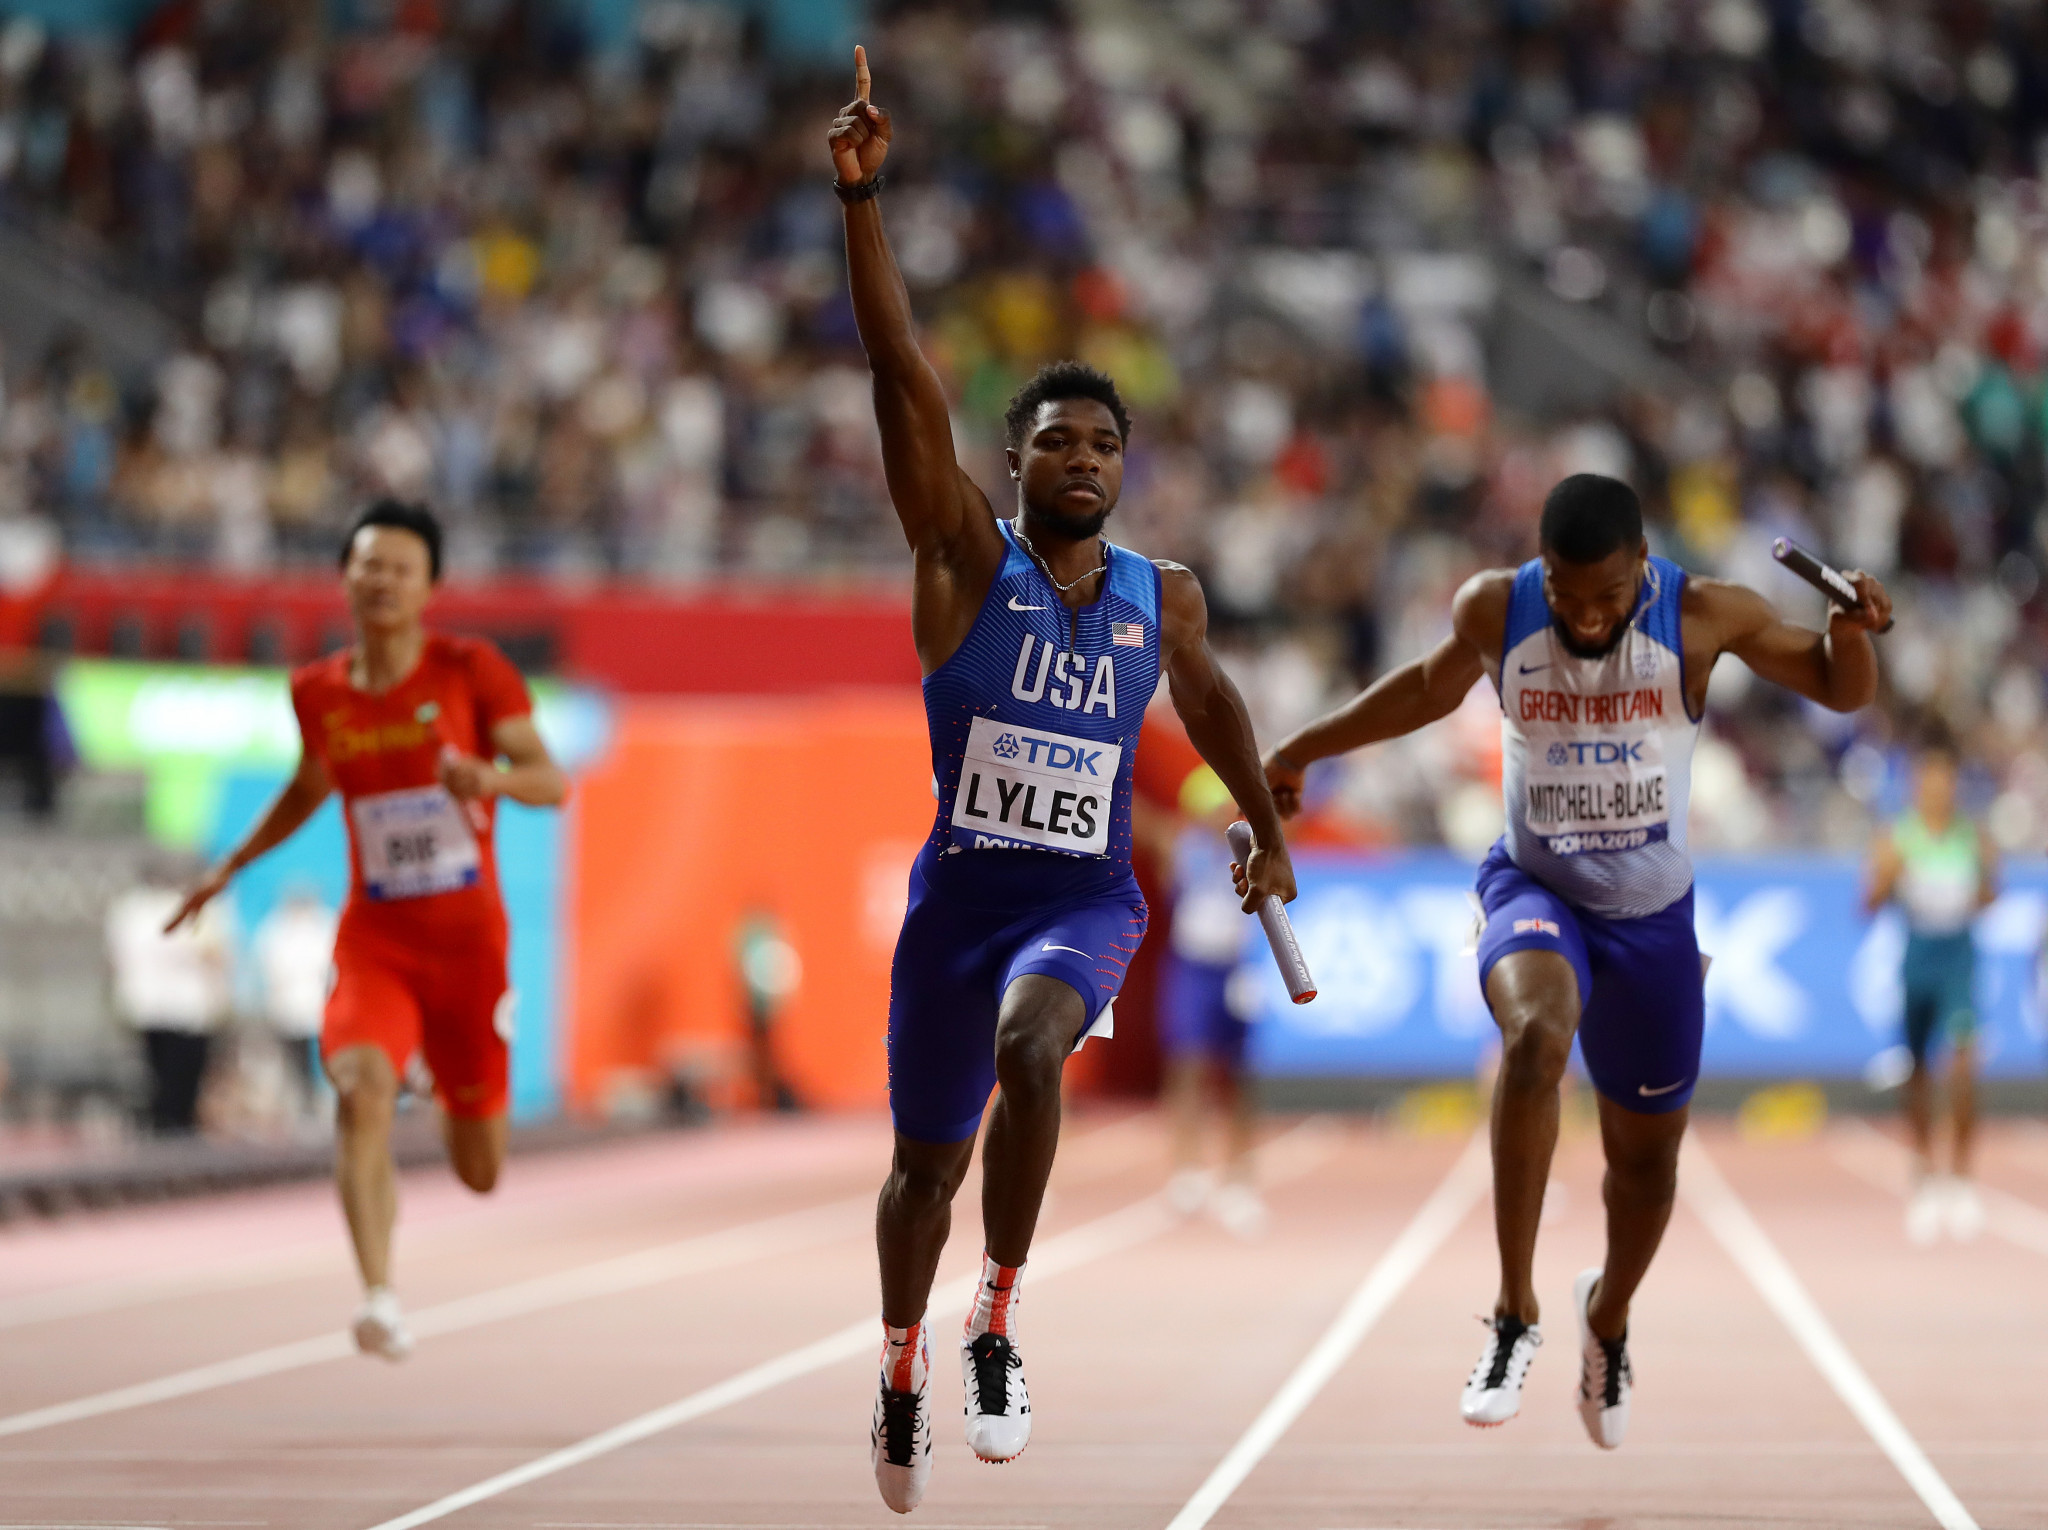 Noah Lyles brings home the baton to earn the United States 4x100m gold at last year's World Athletics Championships, where he also won the 200m title ©Getty Images